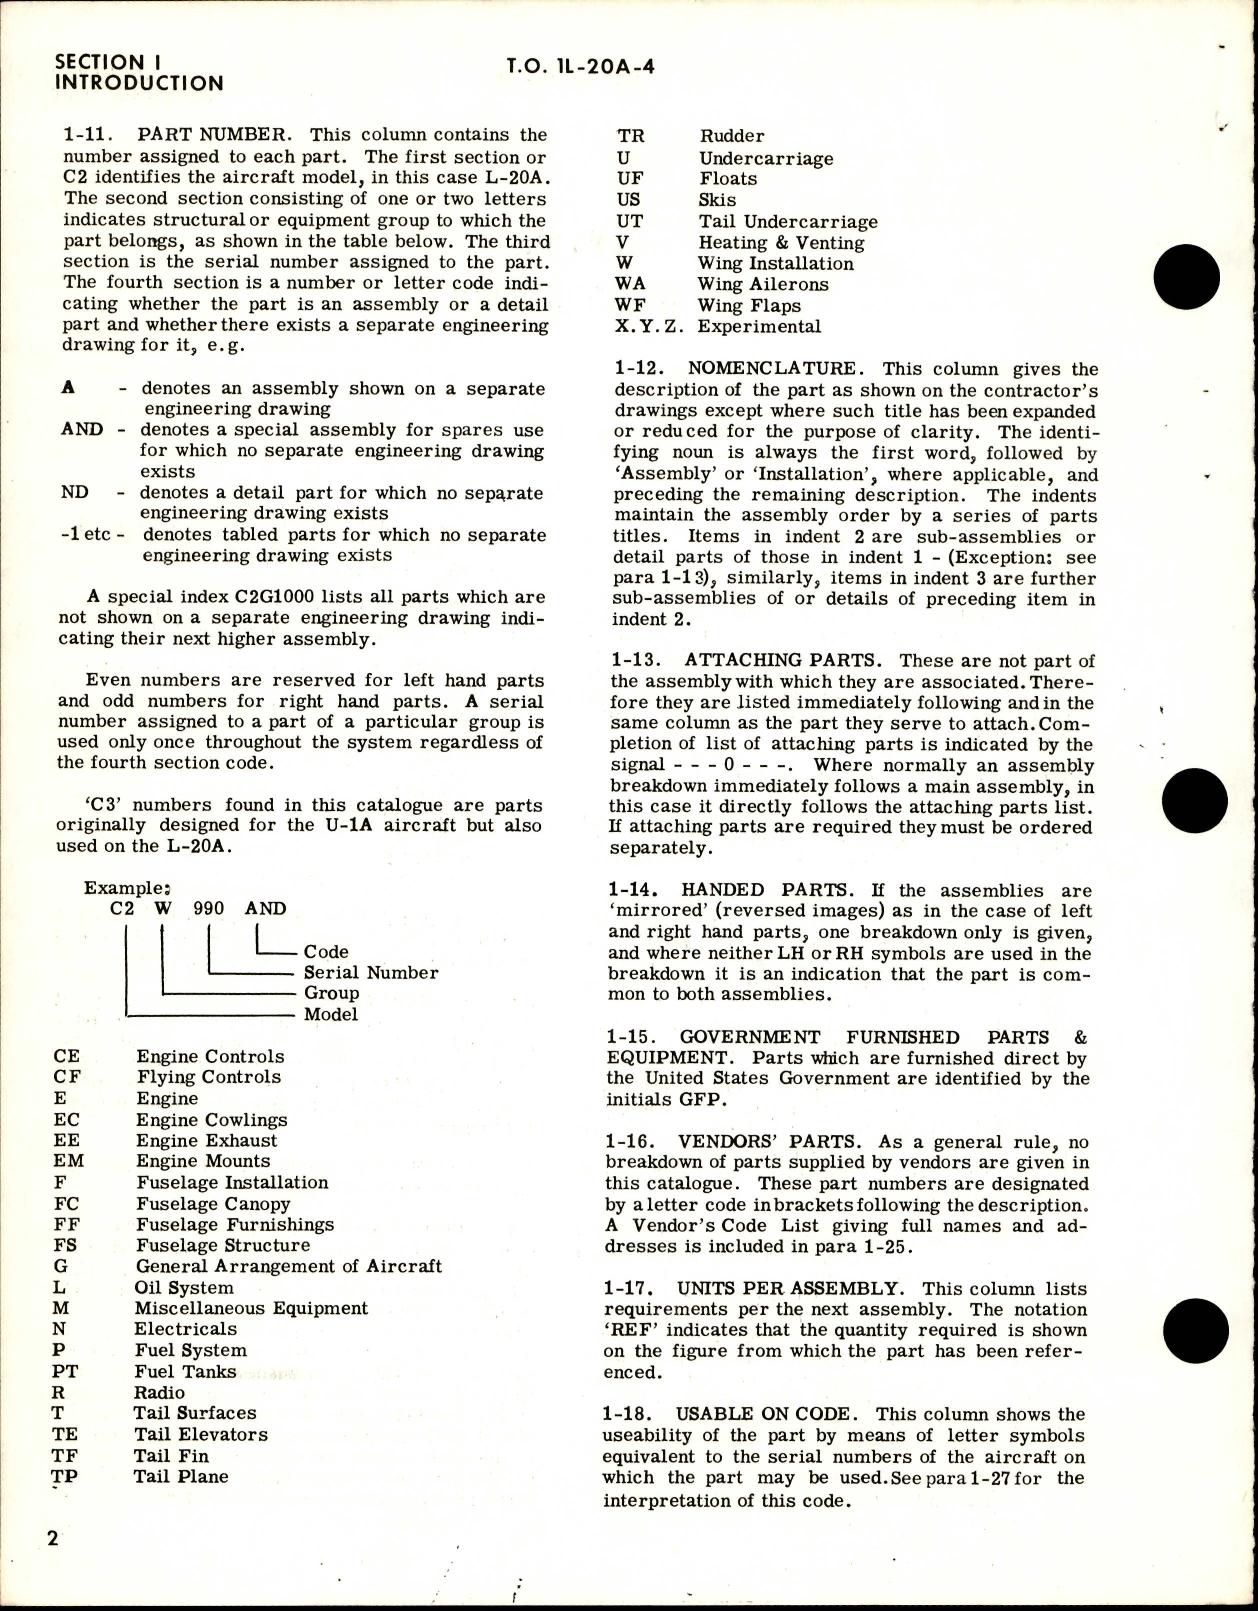 Sample page 8 from AirCorps Library document: Parts Catalog for L-20A 